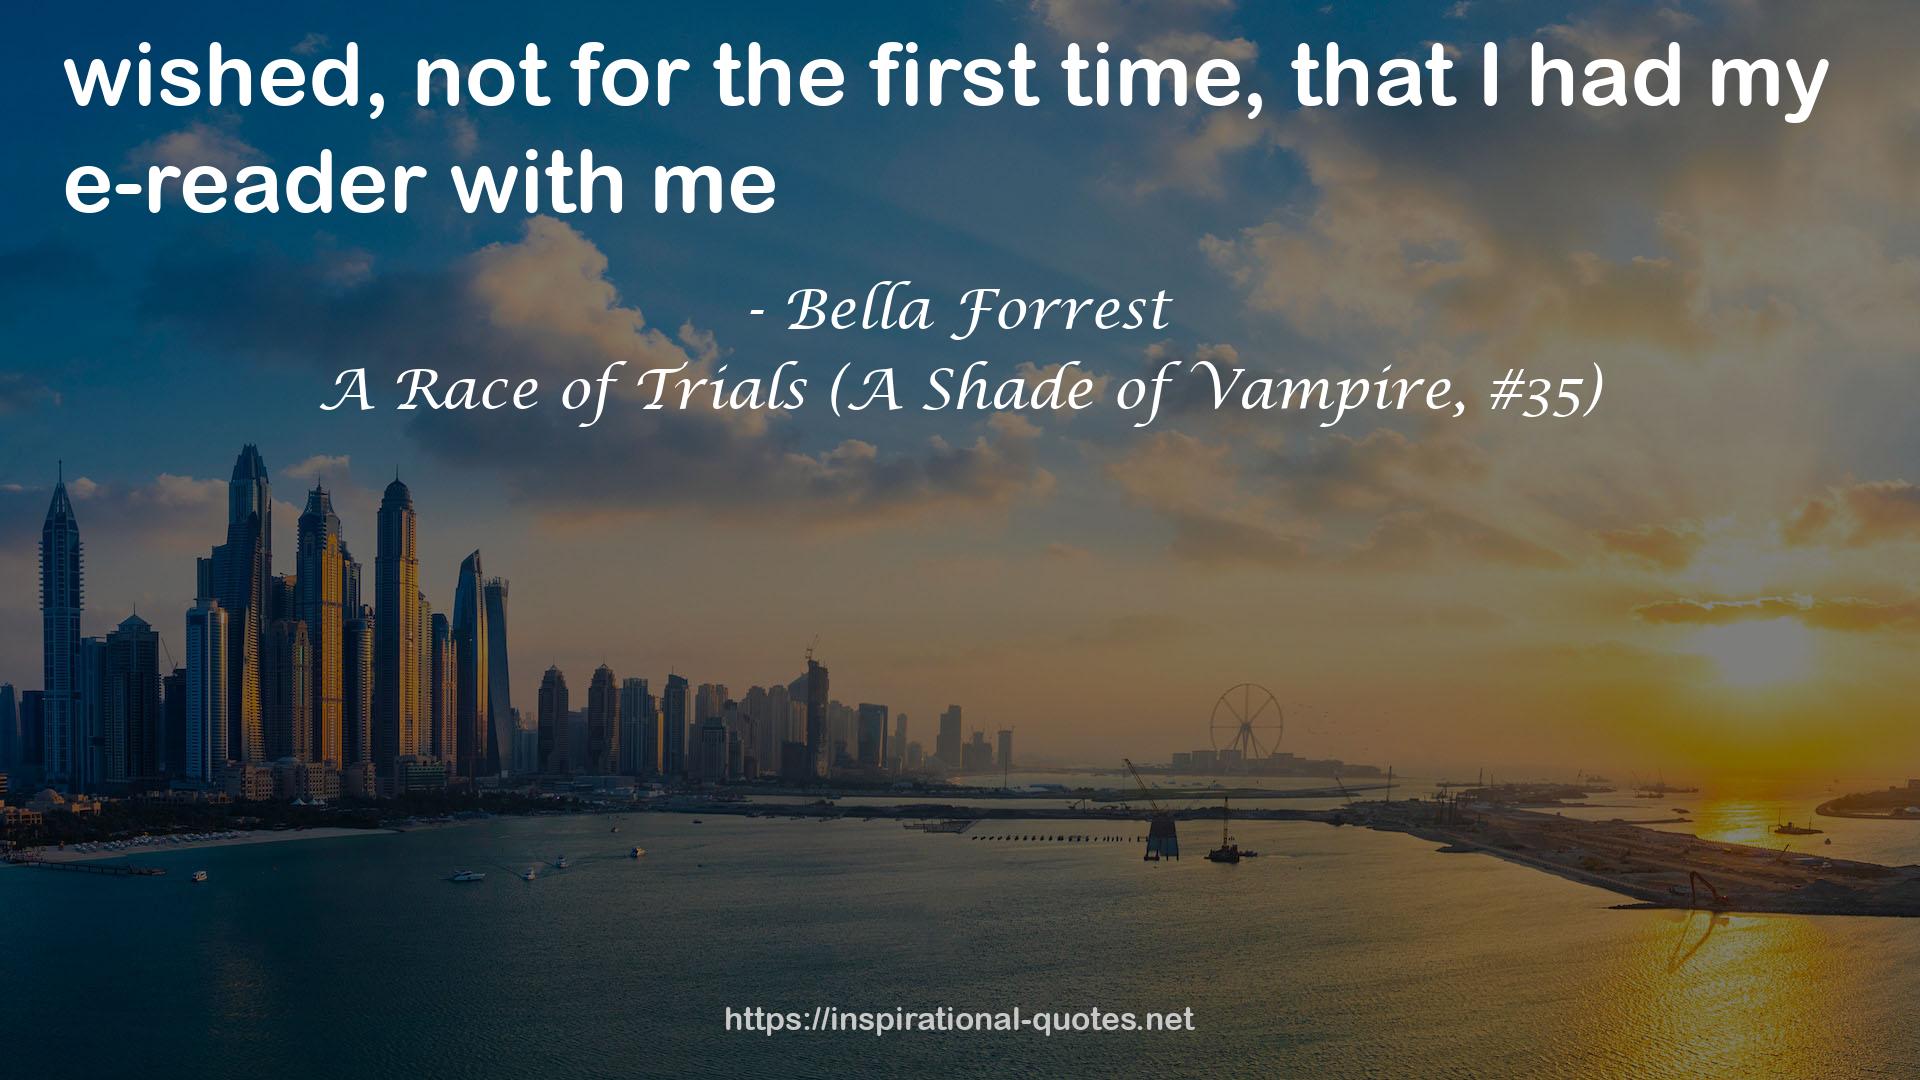 A Race of Trials (A Shade of Vampire, #35) QUOTES